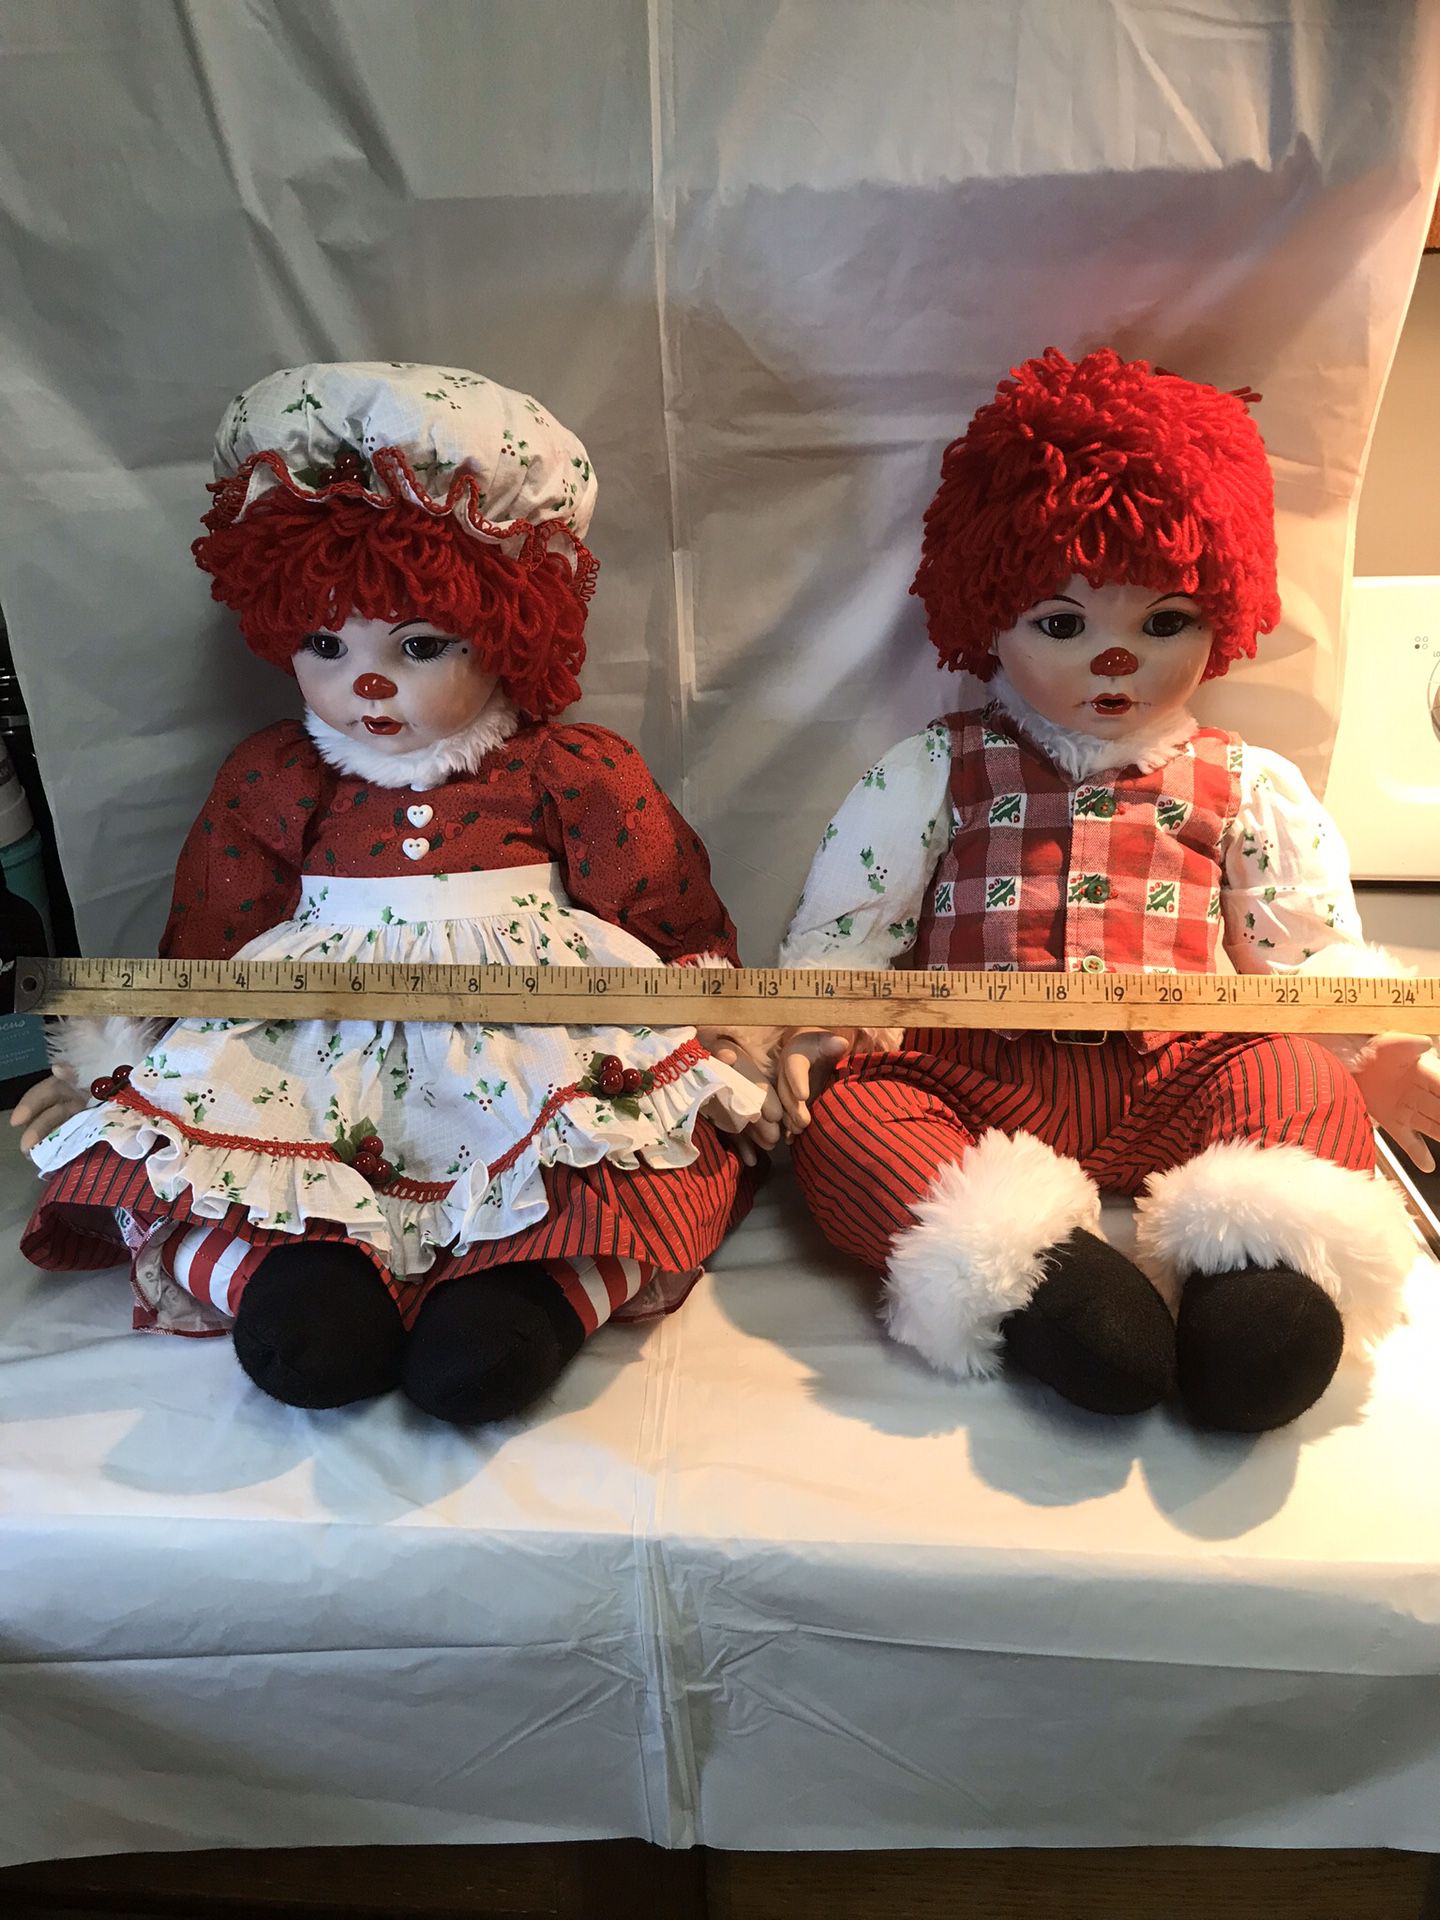 Raggedy Ann and Andy porcelain dolls